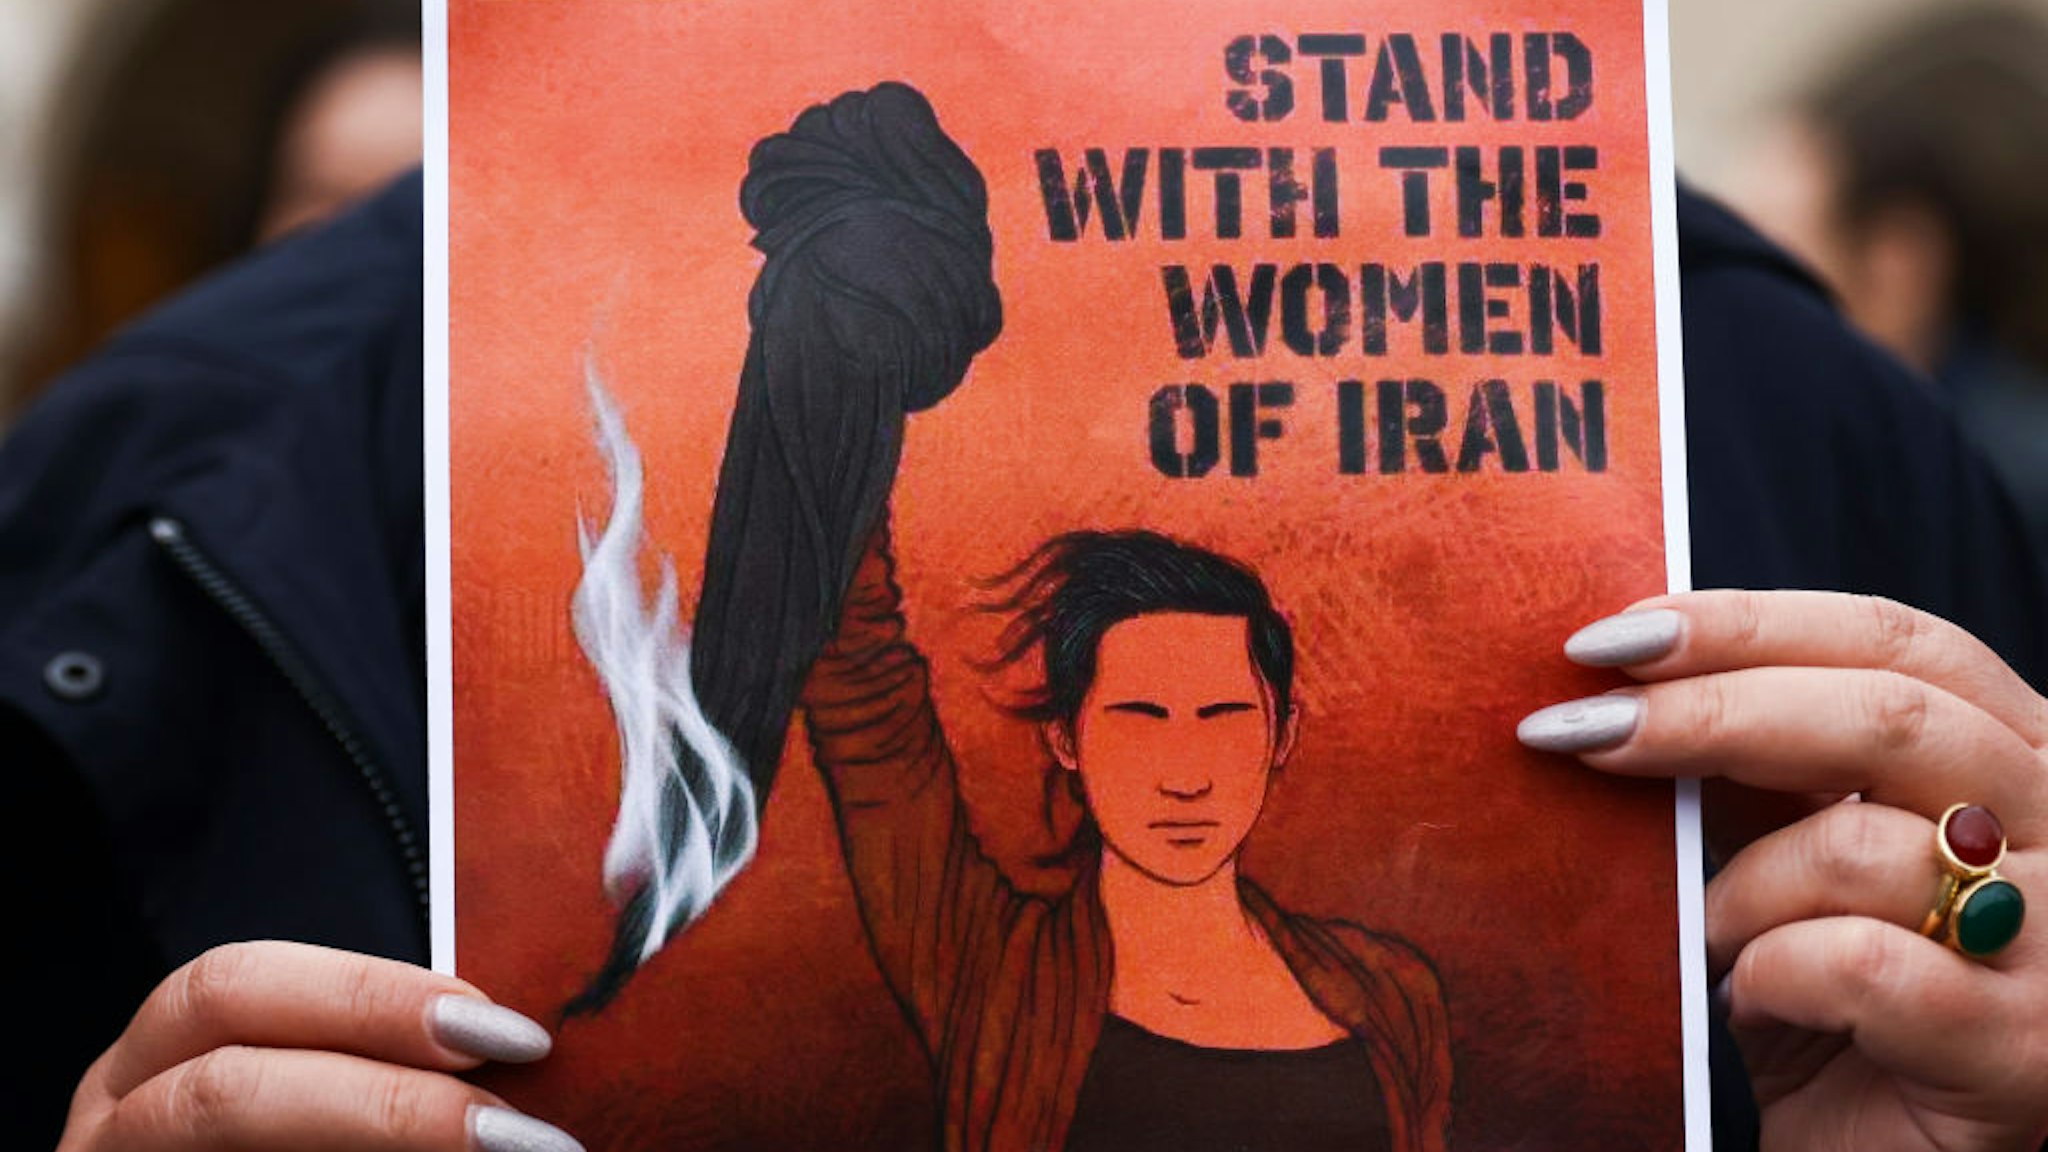 A banner 'Stand with the women of Iran' is seen during solidarity demonstration in memory of Mahsa Amini, at the Main Square in Krakow, Poland on October 1st, 2022.